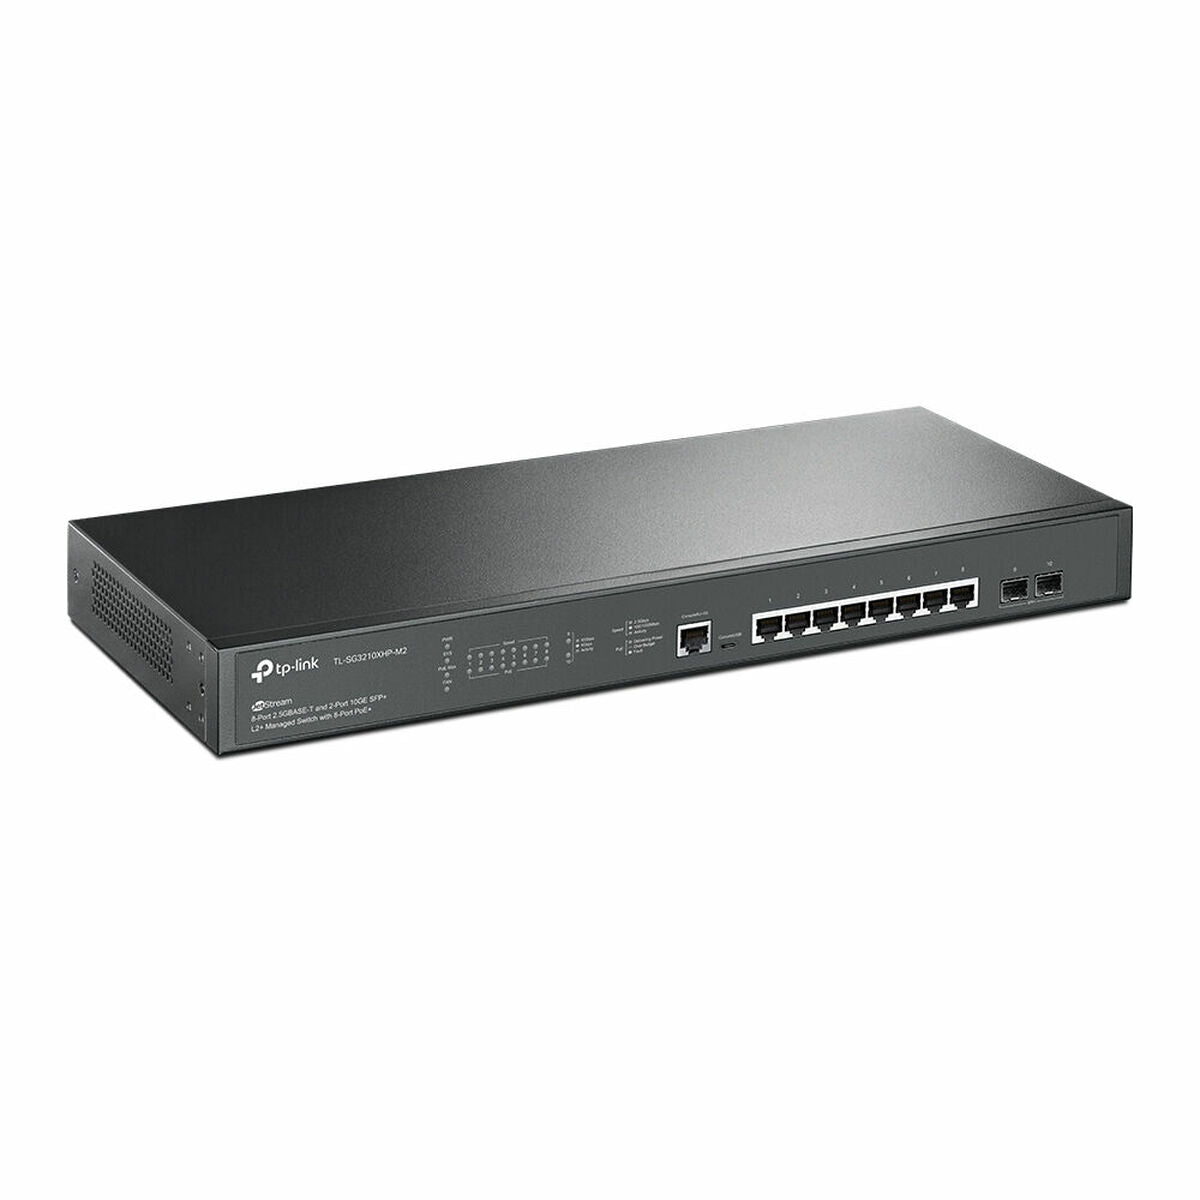 Switch TP-Link TL-SG3210XHP-M2 2,5 Gigabit Ethernet, TP-Link, Computing, Network devices, switch-tp-link-tl-sg3210xhp-m2-2-5-gigabit-ethernet, Brand_TP-Link, category-reference-2609, category-reference-2803, category-reference-2827, category-reference-t-19685, category-reference-t-19914, Condition_NEW, networks/wiring, Price_400 - 500, Teleworking, RiotNook